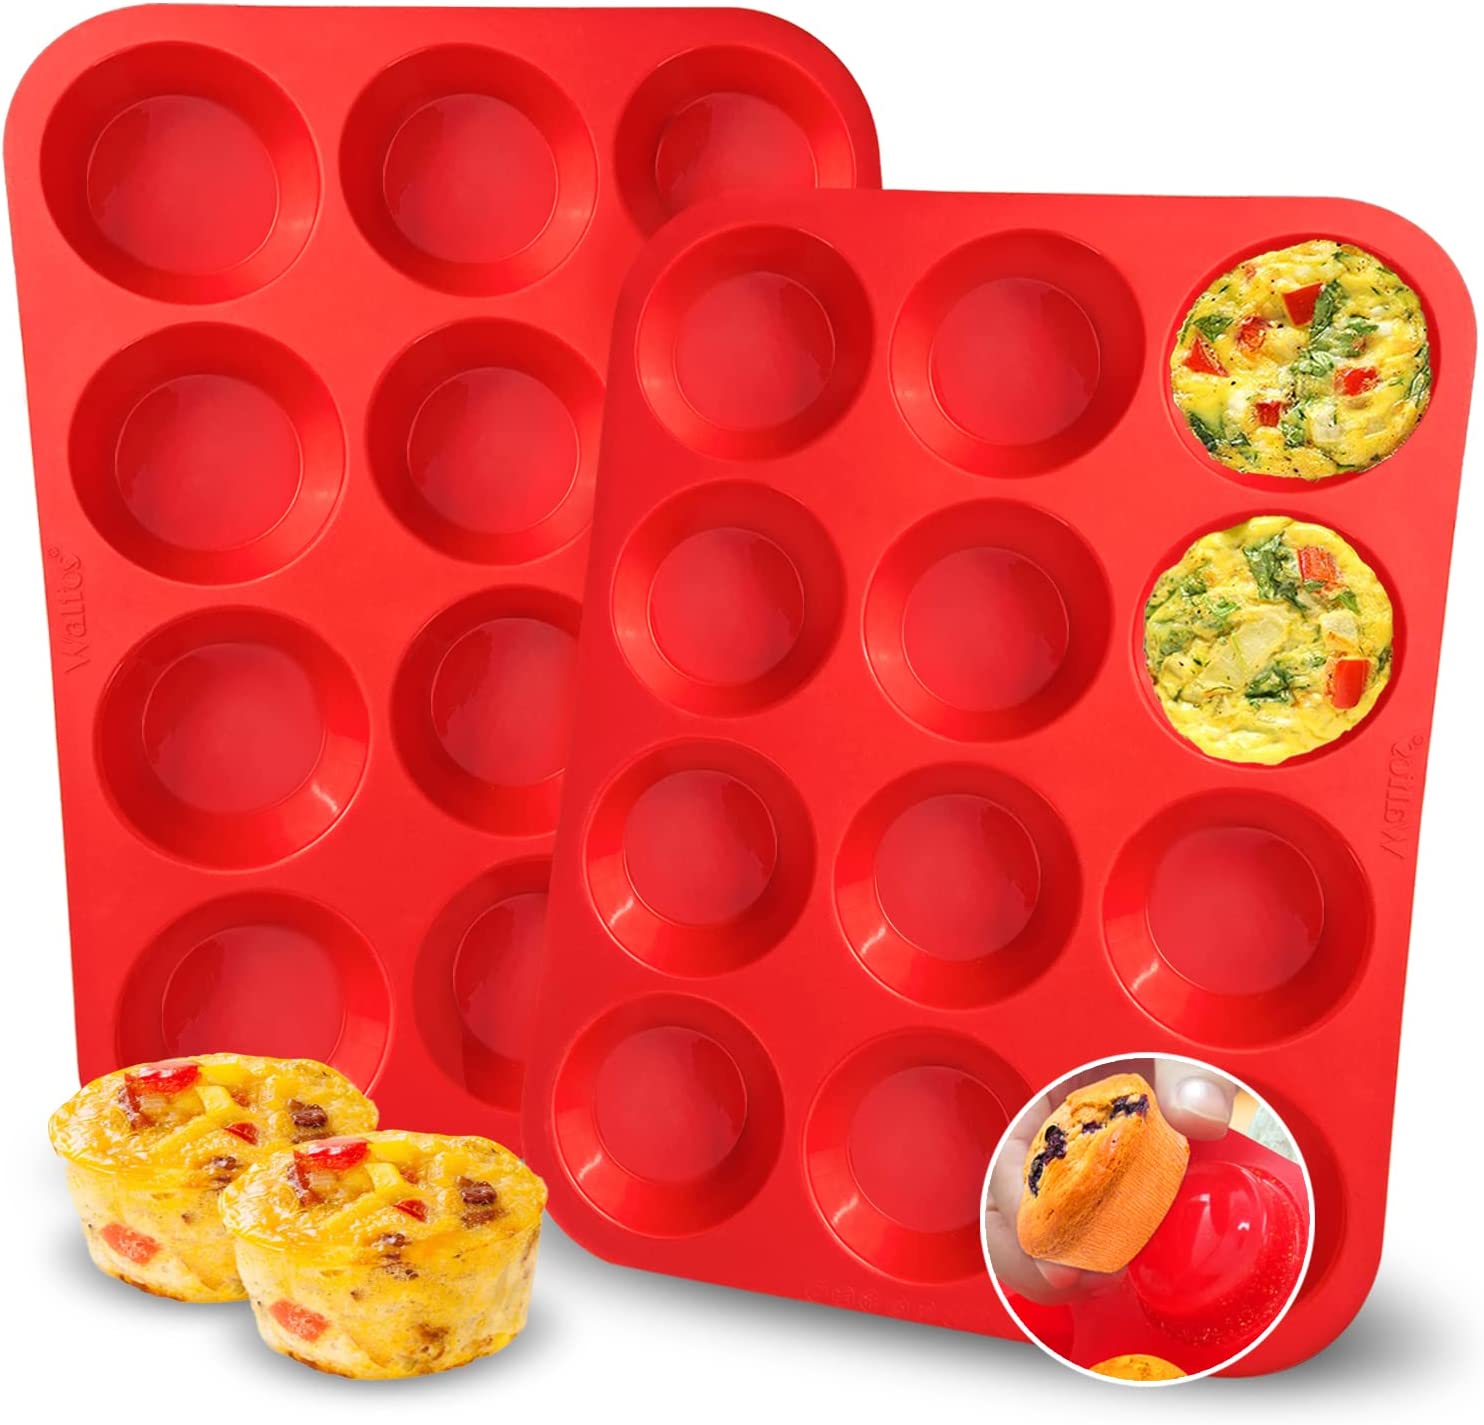 Nonstick Bakeware 6-Cup Muffin Pan with Silicone Cupcake Liners (Set of 6) by Boxiki Kitchen | Premium Nonstick Baking Muffin Tin and Muffin Cups